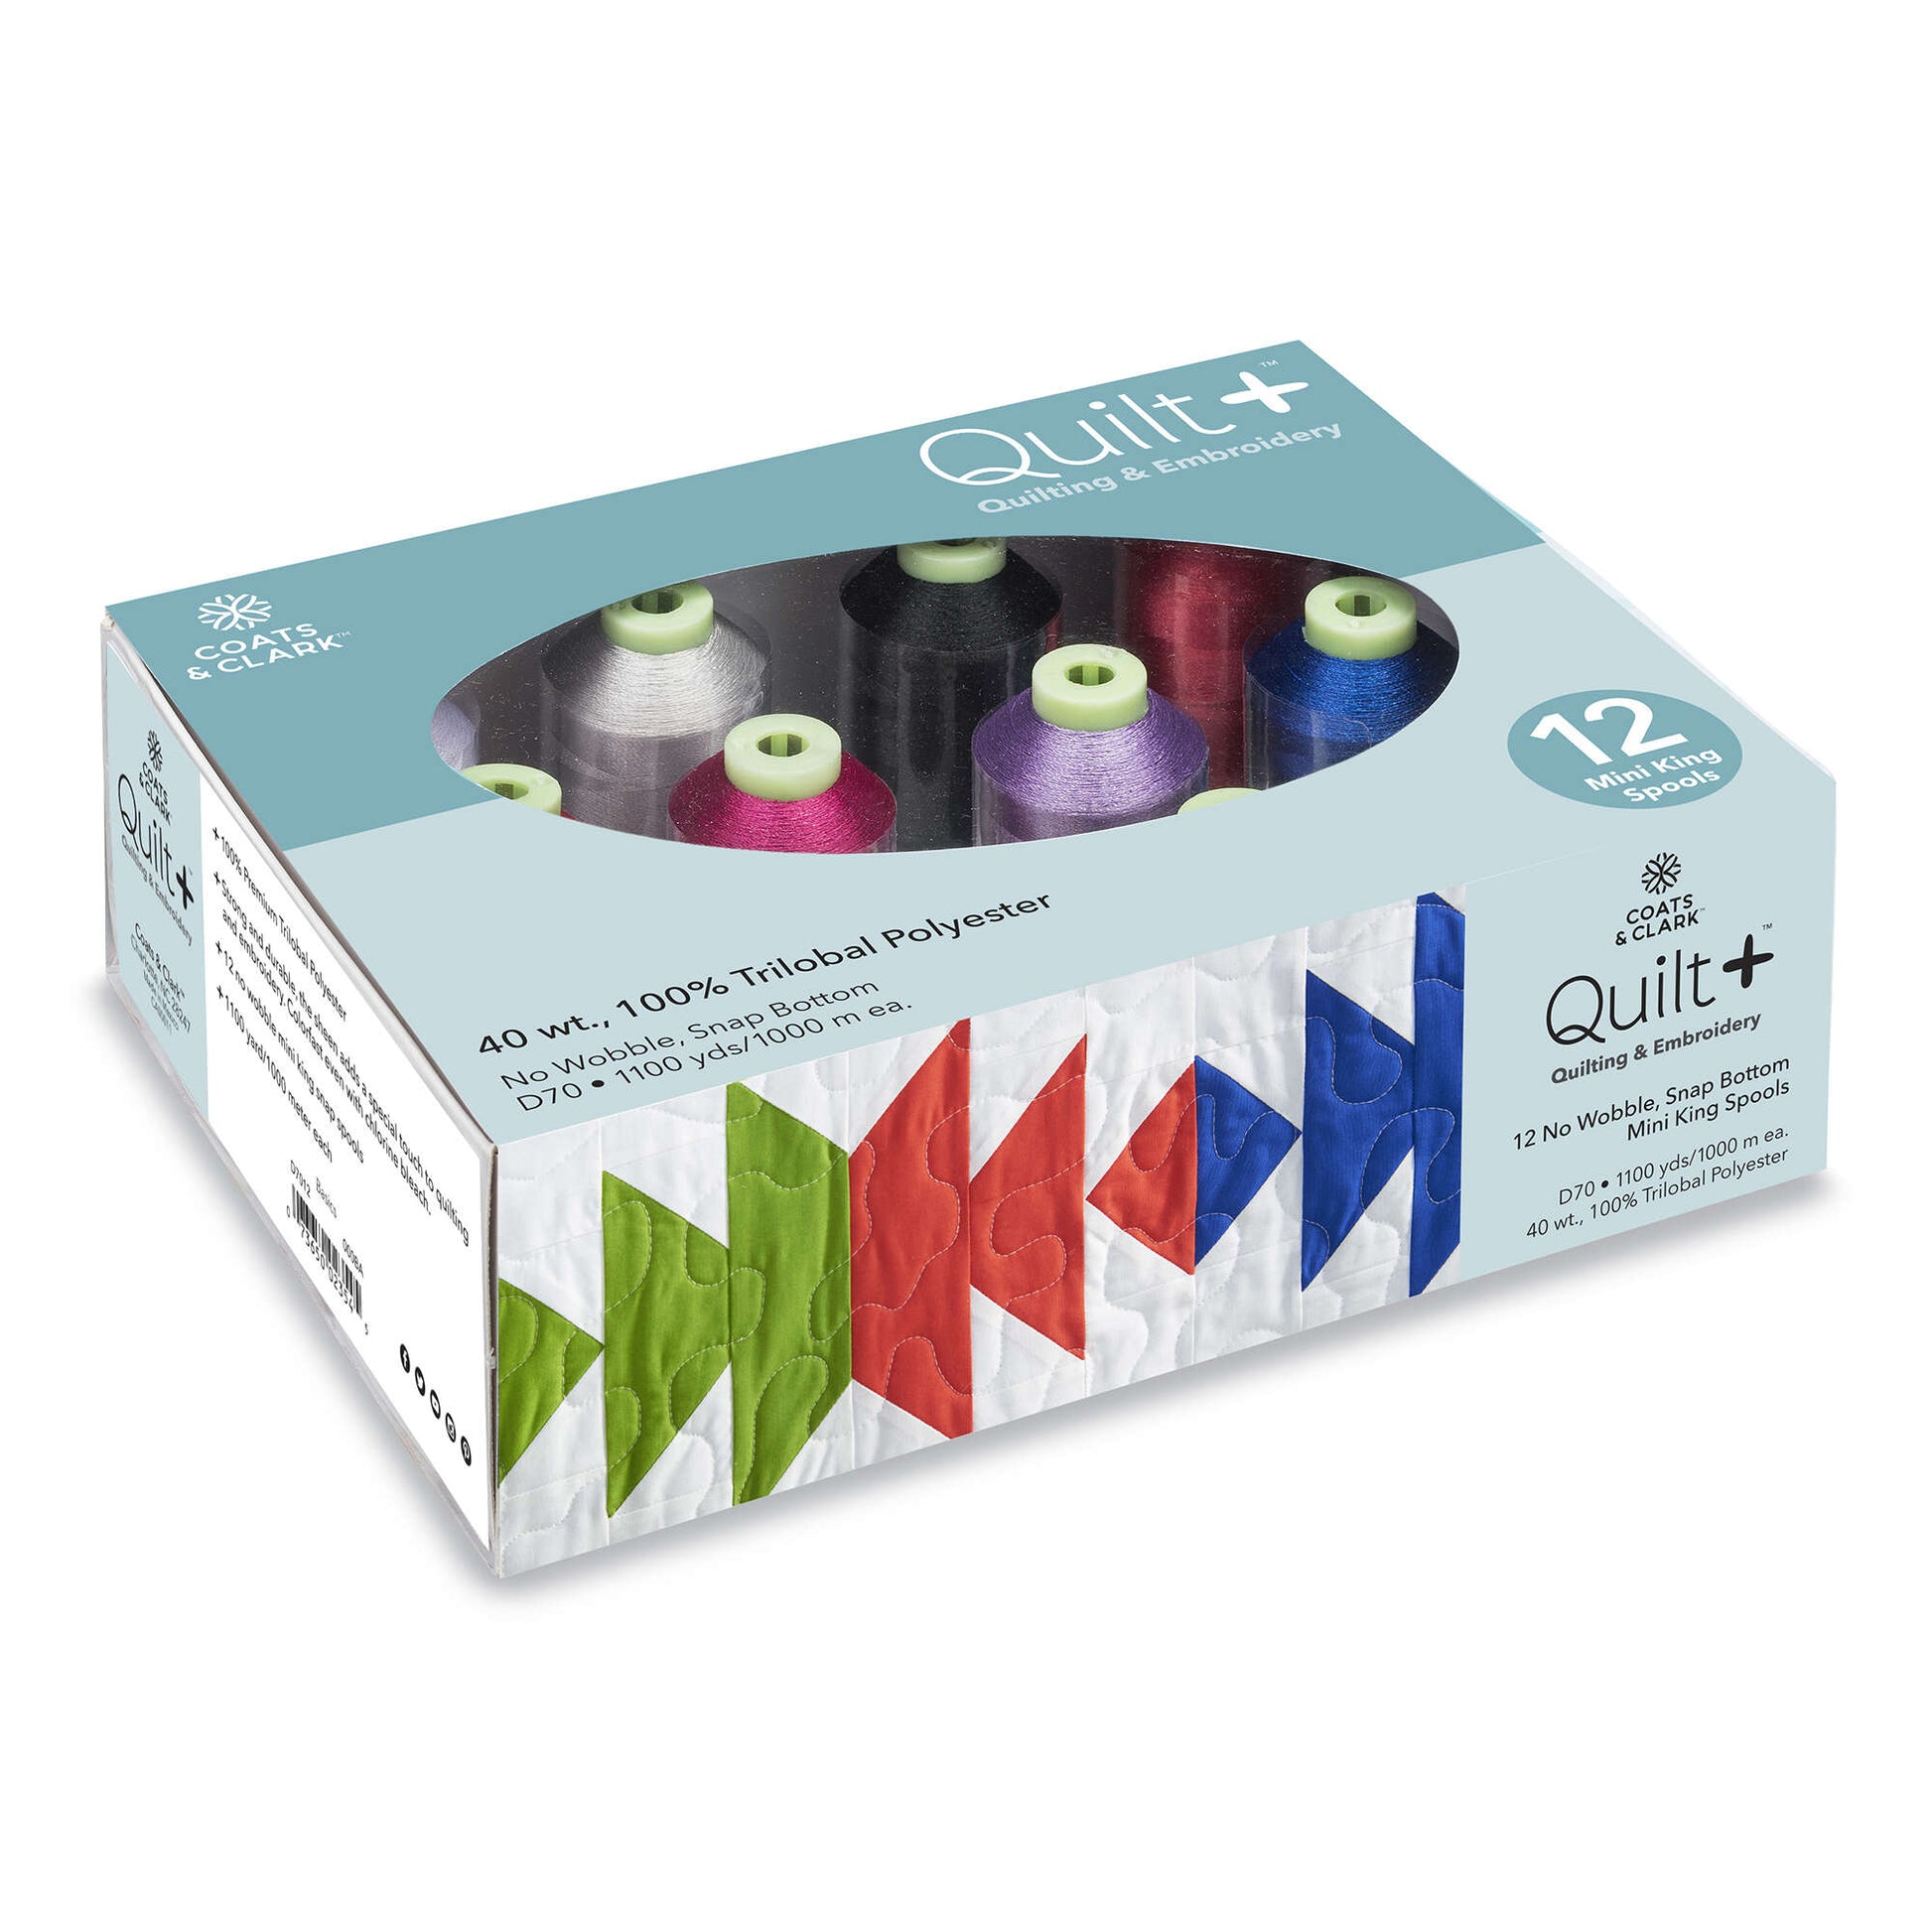 Coats & Clark Quilt + Quilting & Embroidery Thread 12 Spool Set